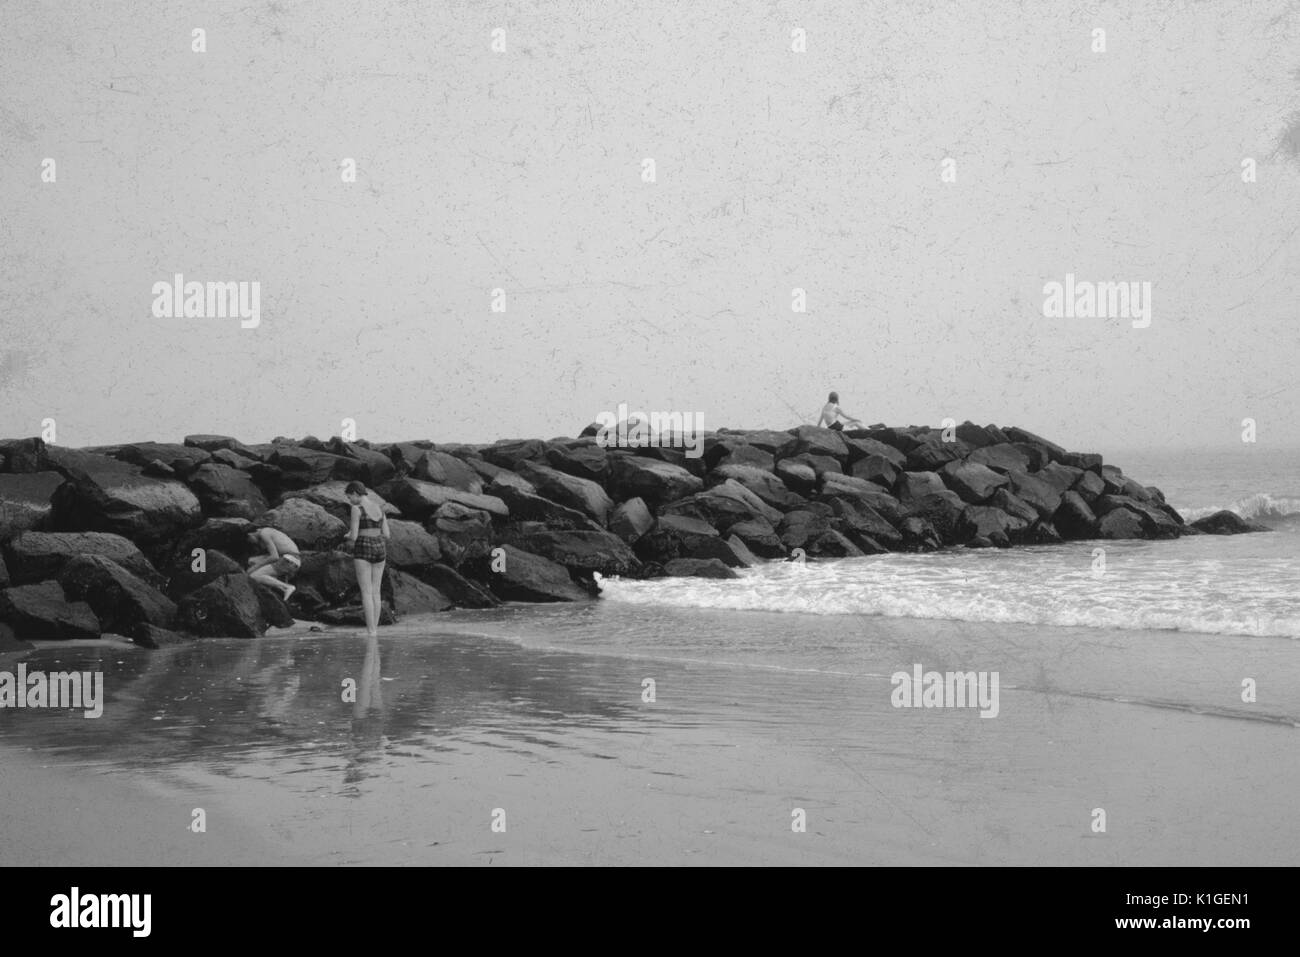 A man and a woman to the side of rocks, a woman on top of the rocks, at a beach, 1966. Stock Photo